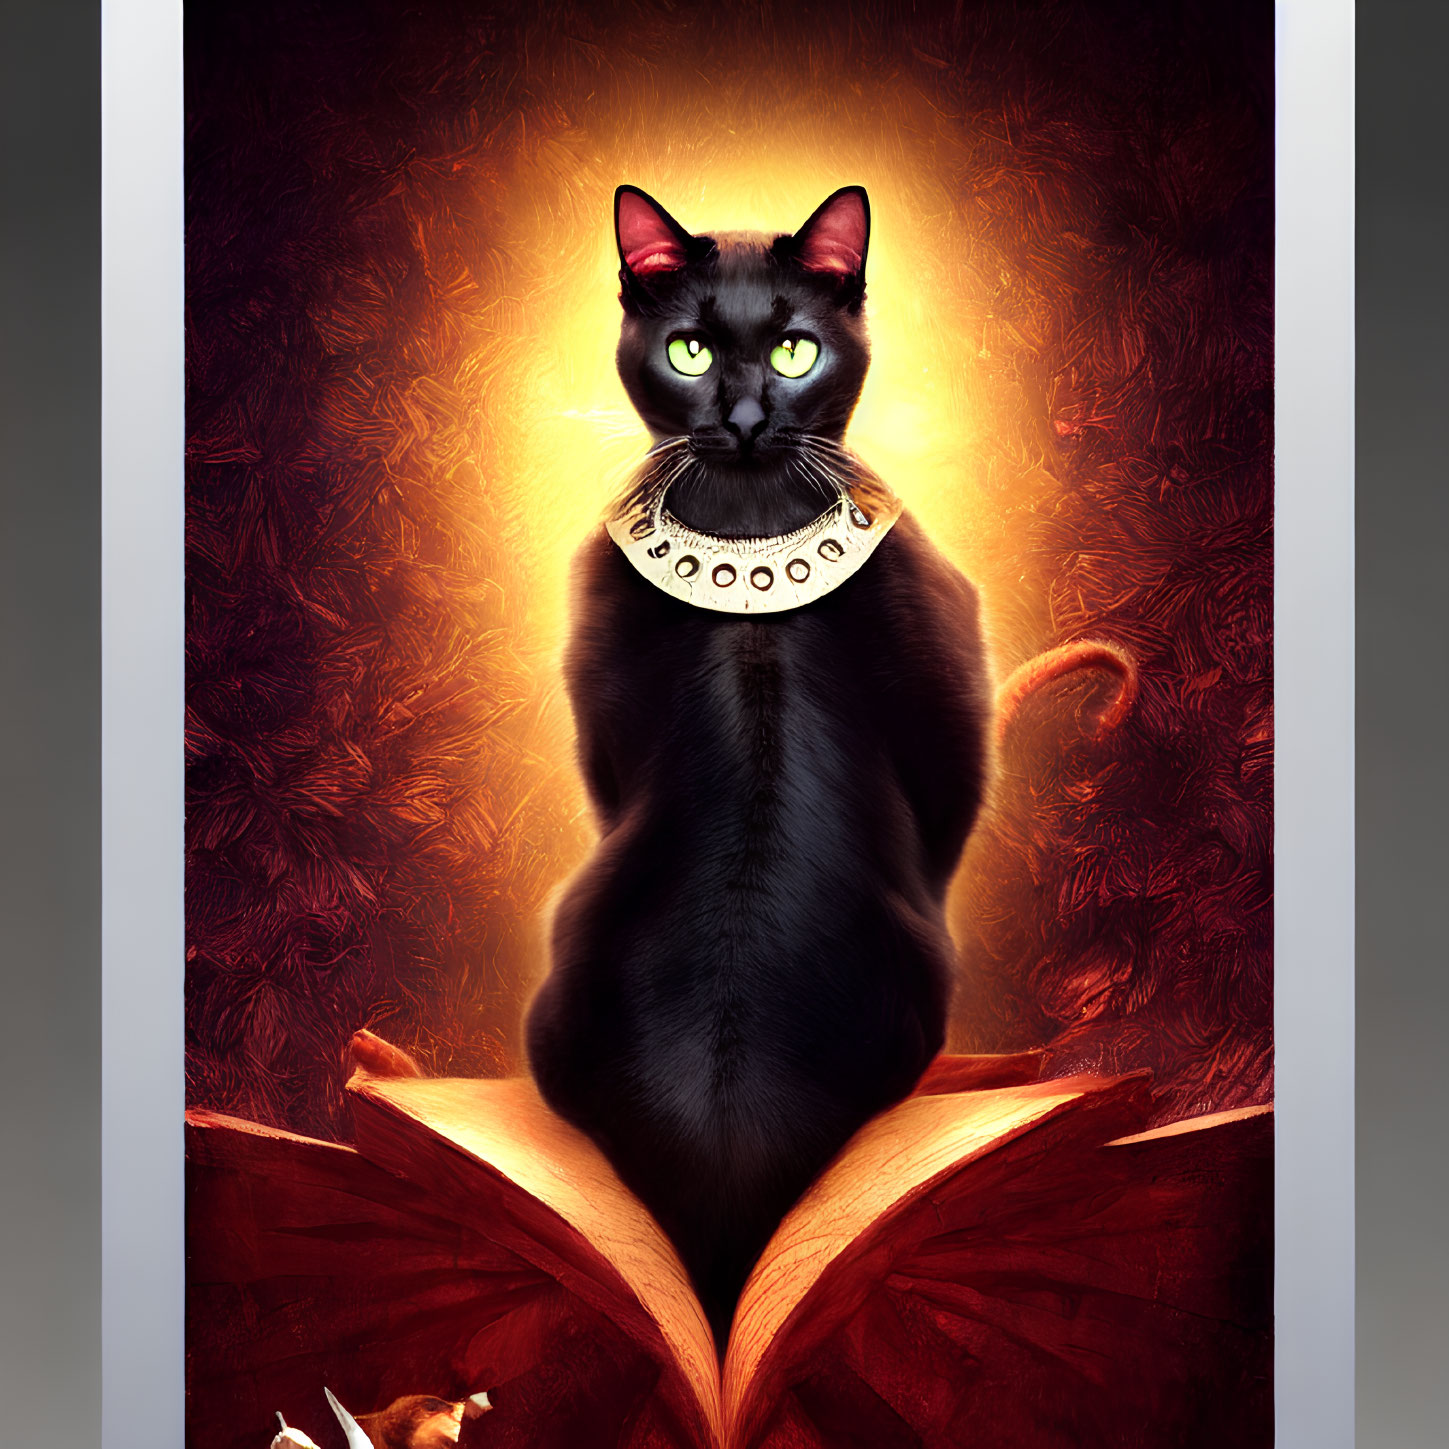 Black Cat with Yellow Eyes on Open Book, Golden Glow, Mouse, Fiery Backdrop